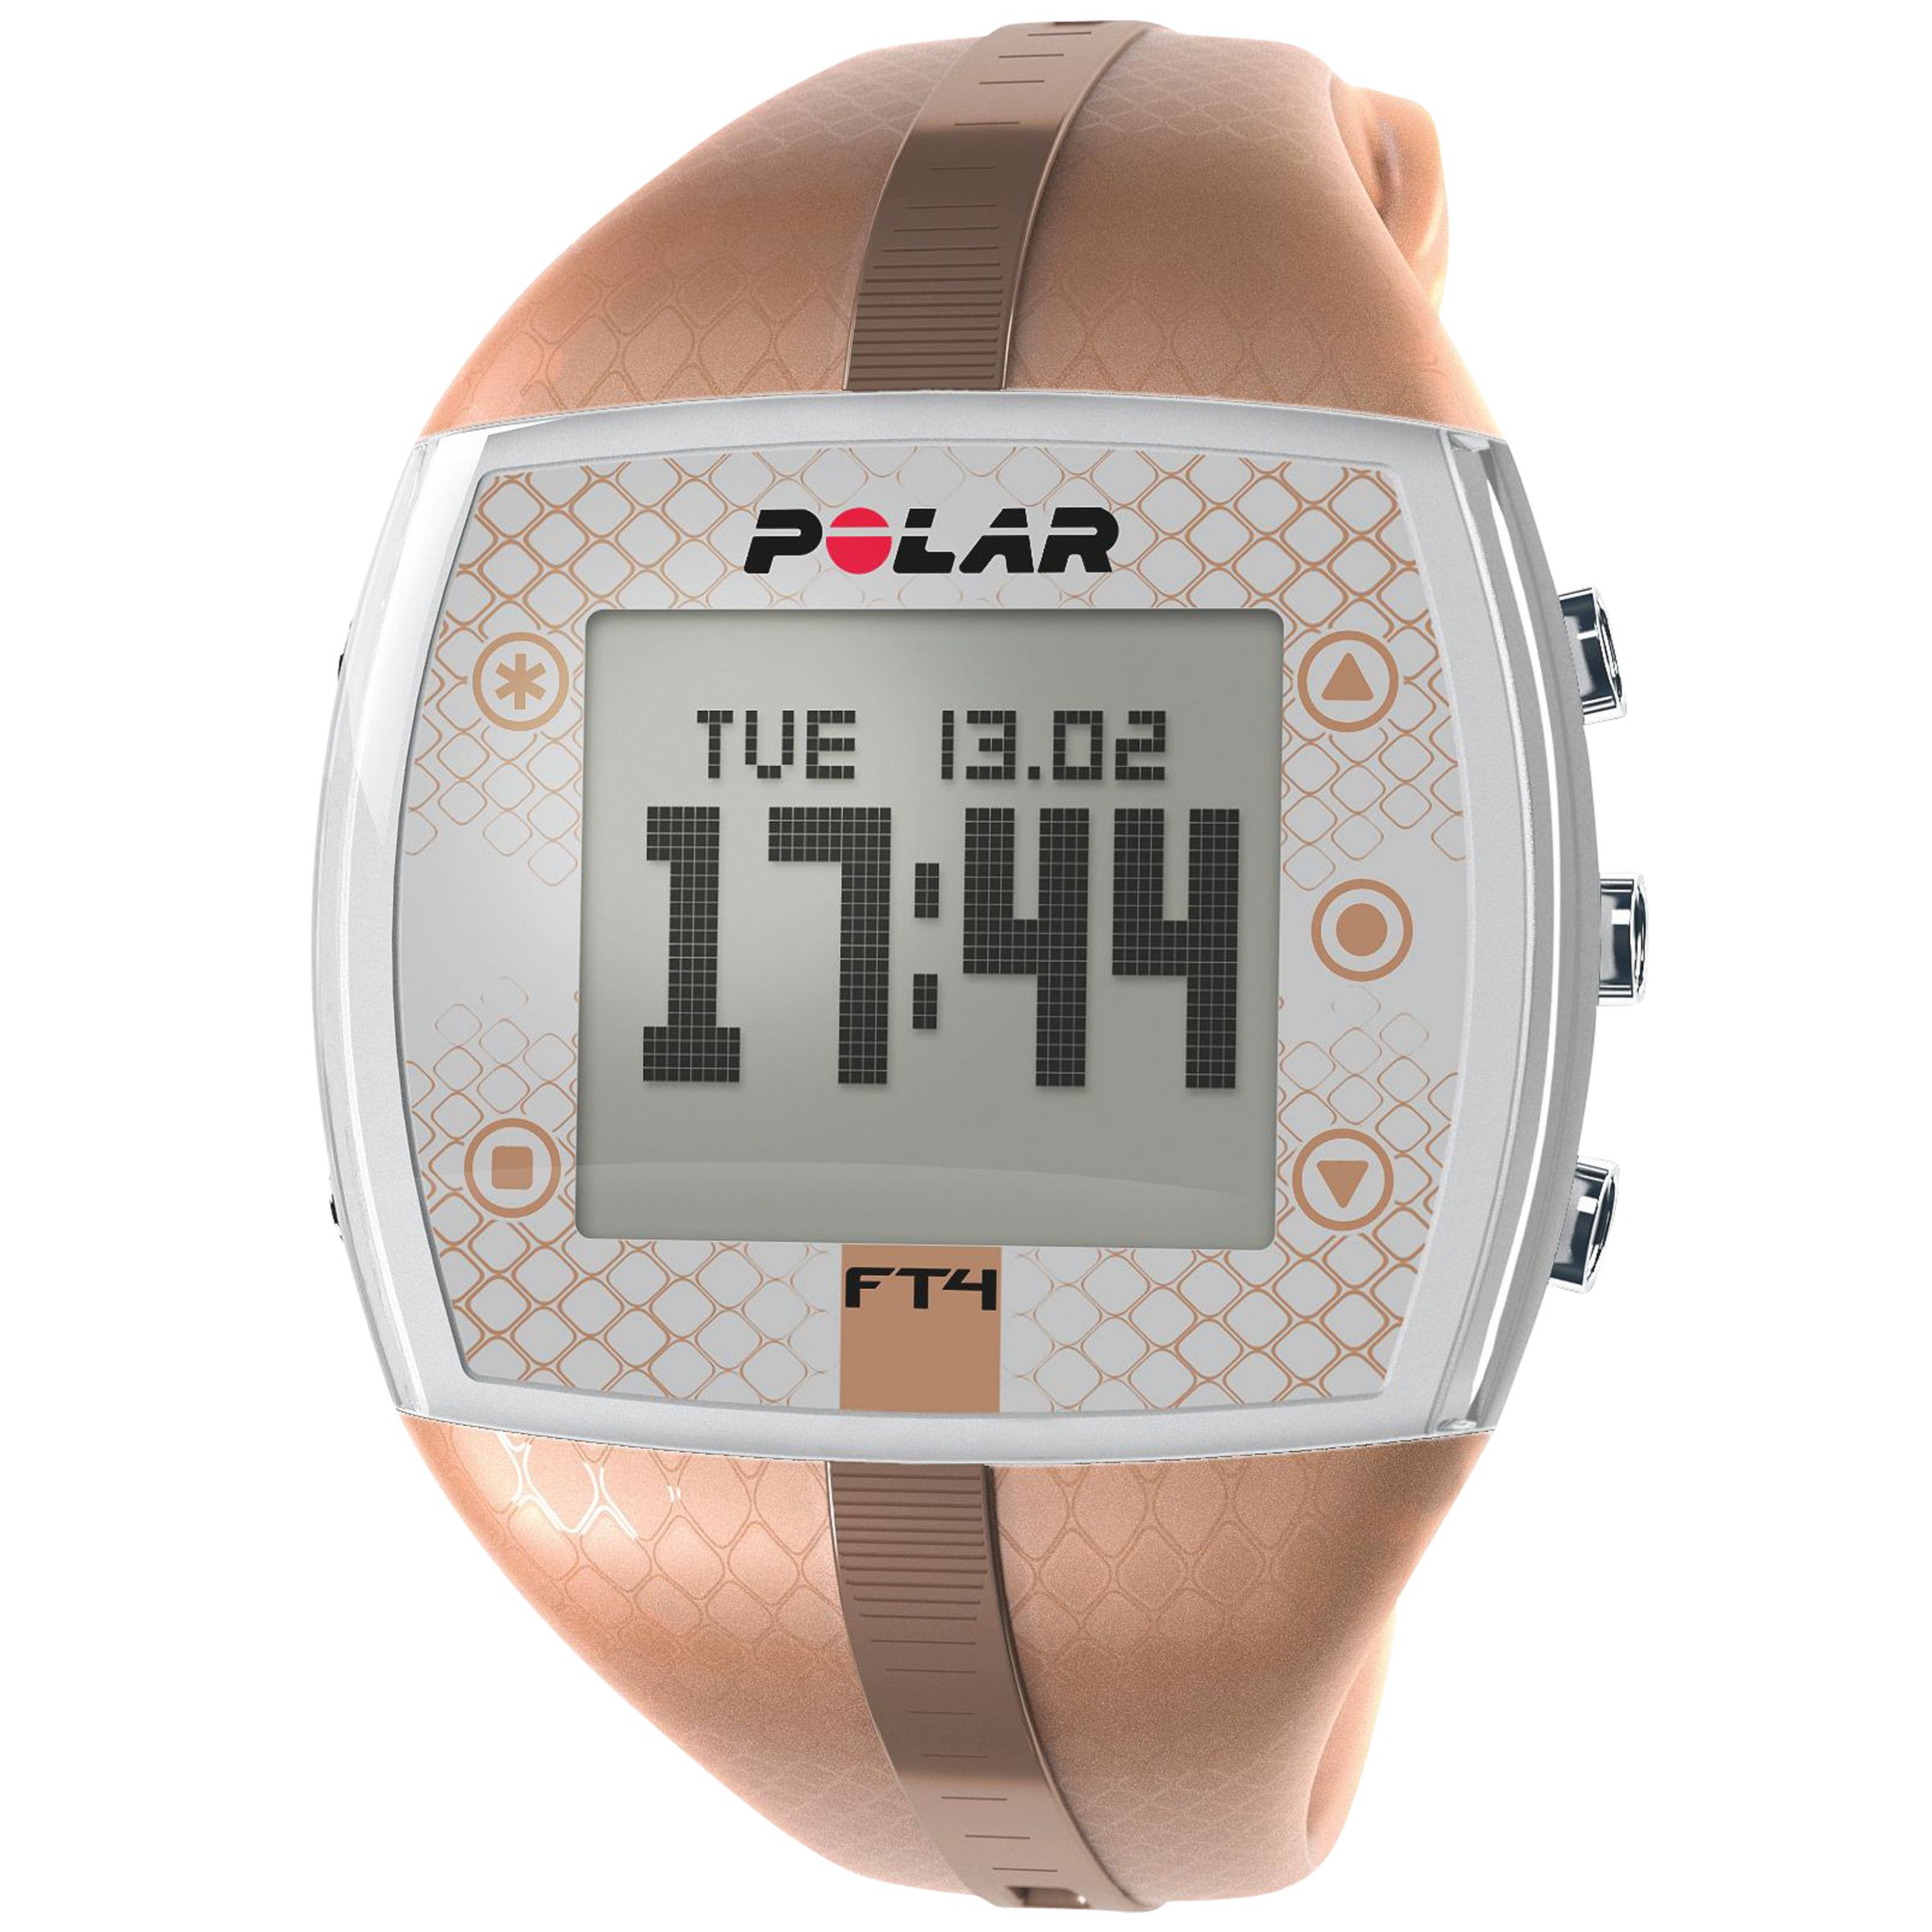 F4 Womens Heart Rate Monitor, Brown